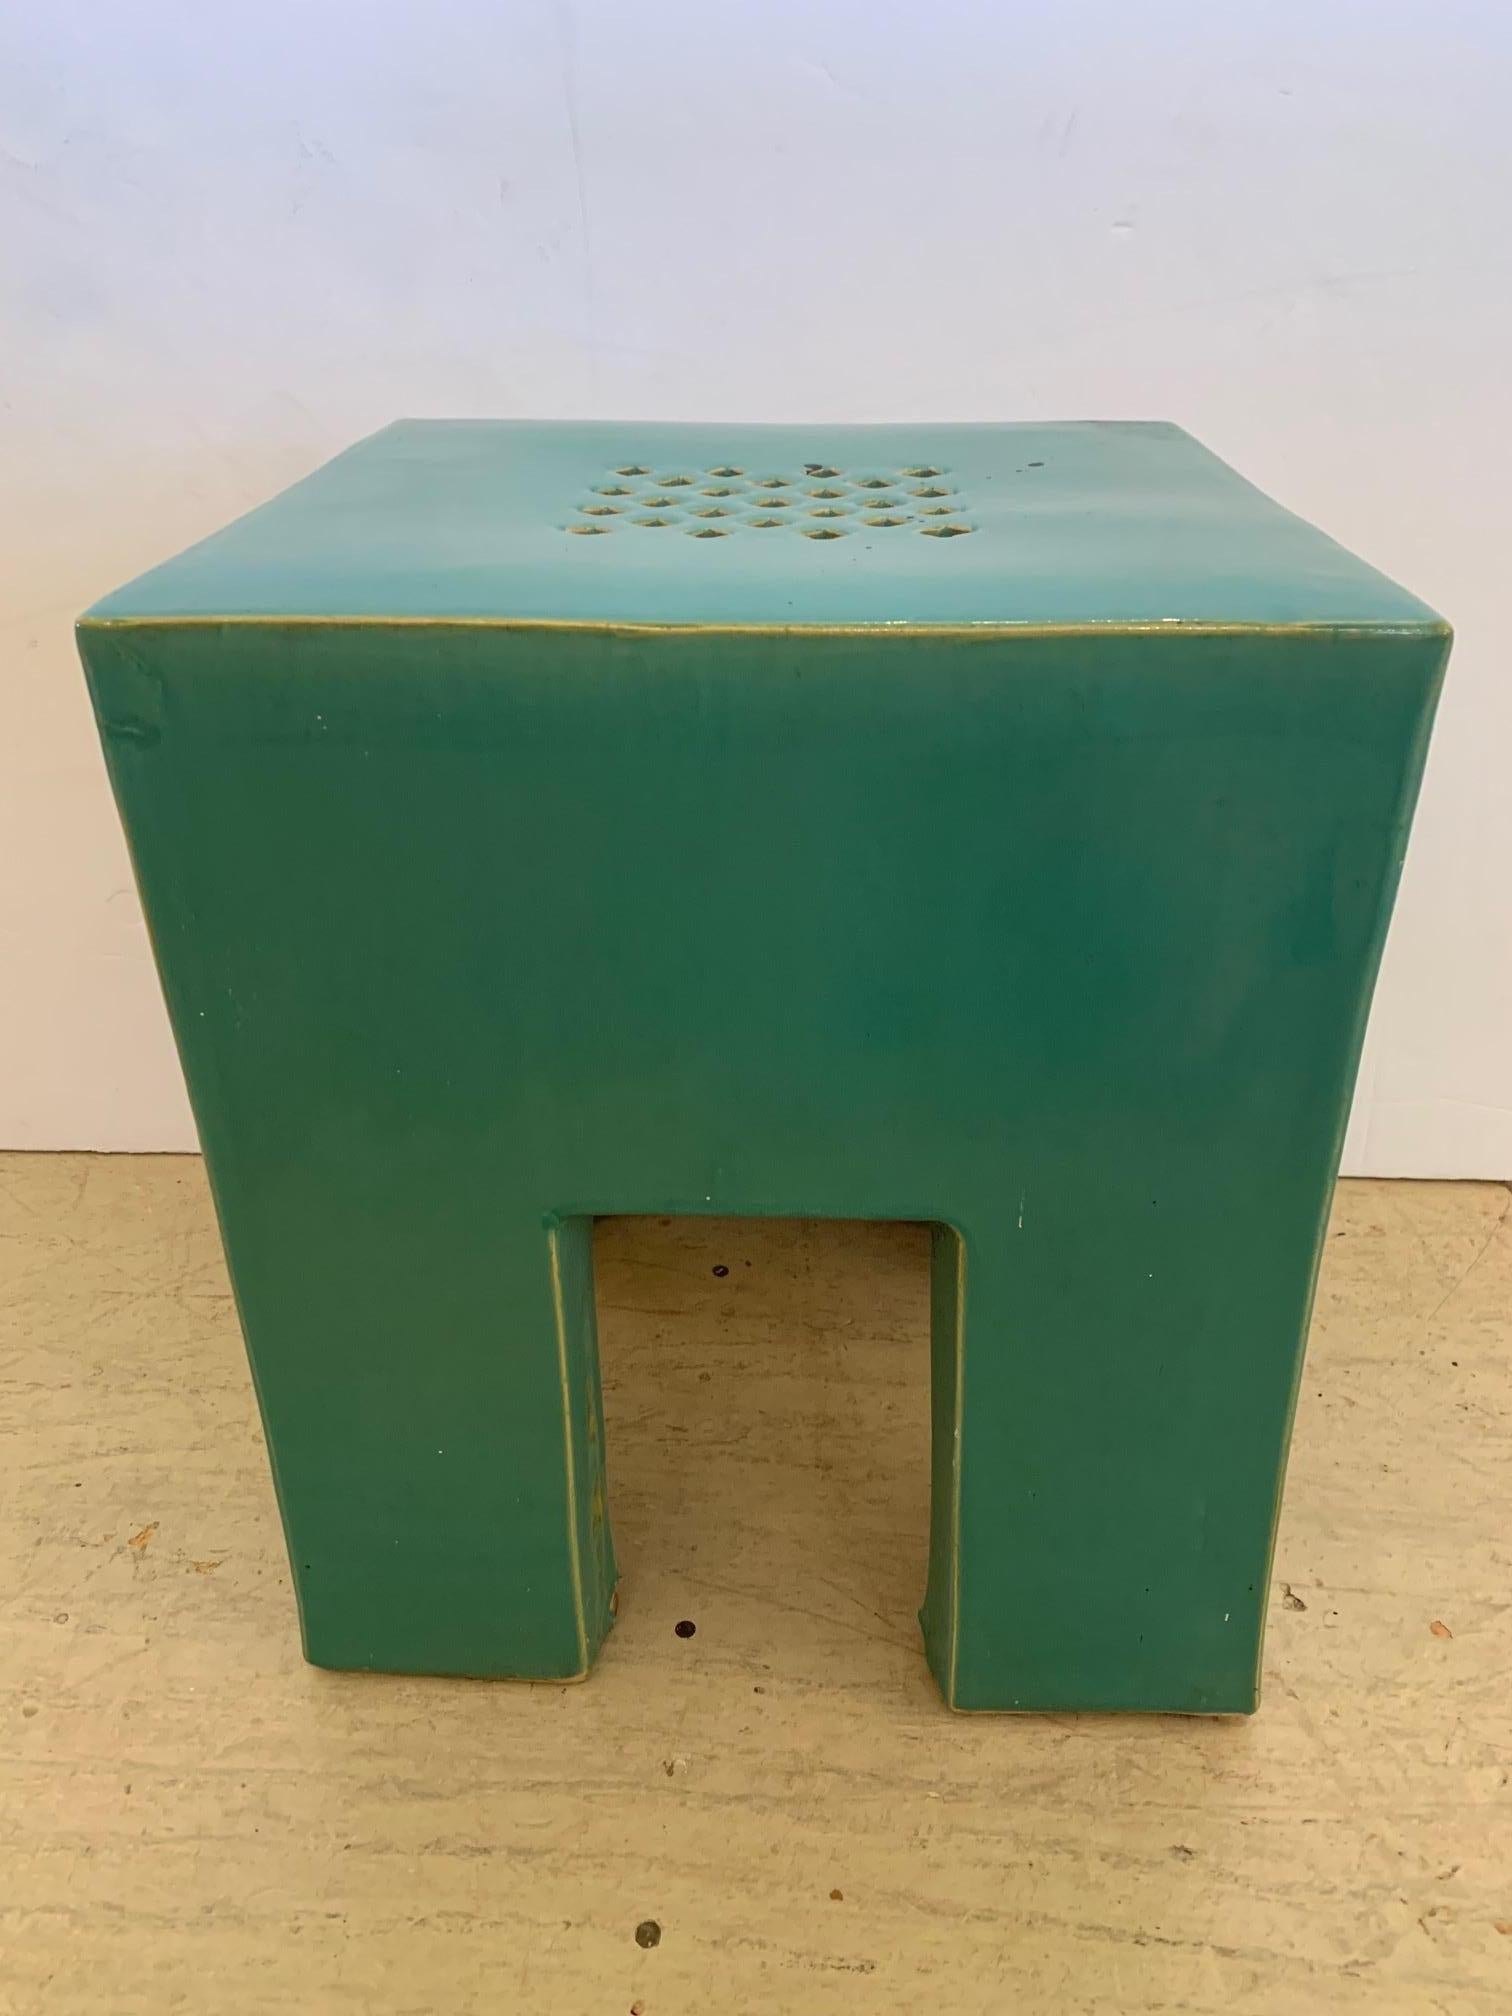 An unusual vintage mid century modern ceramic garden seat in a fabulous shade of celadon, square and sleek. Makes a cool martini table.